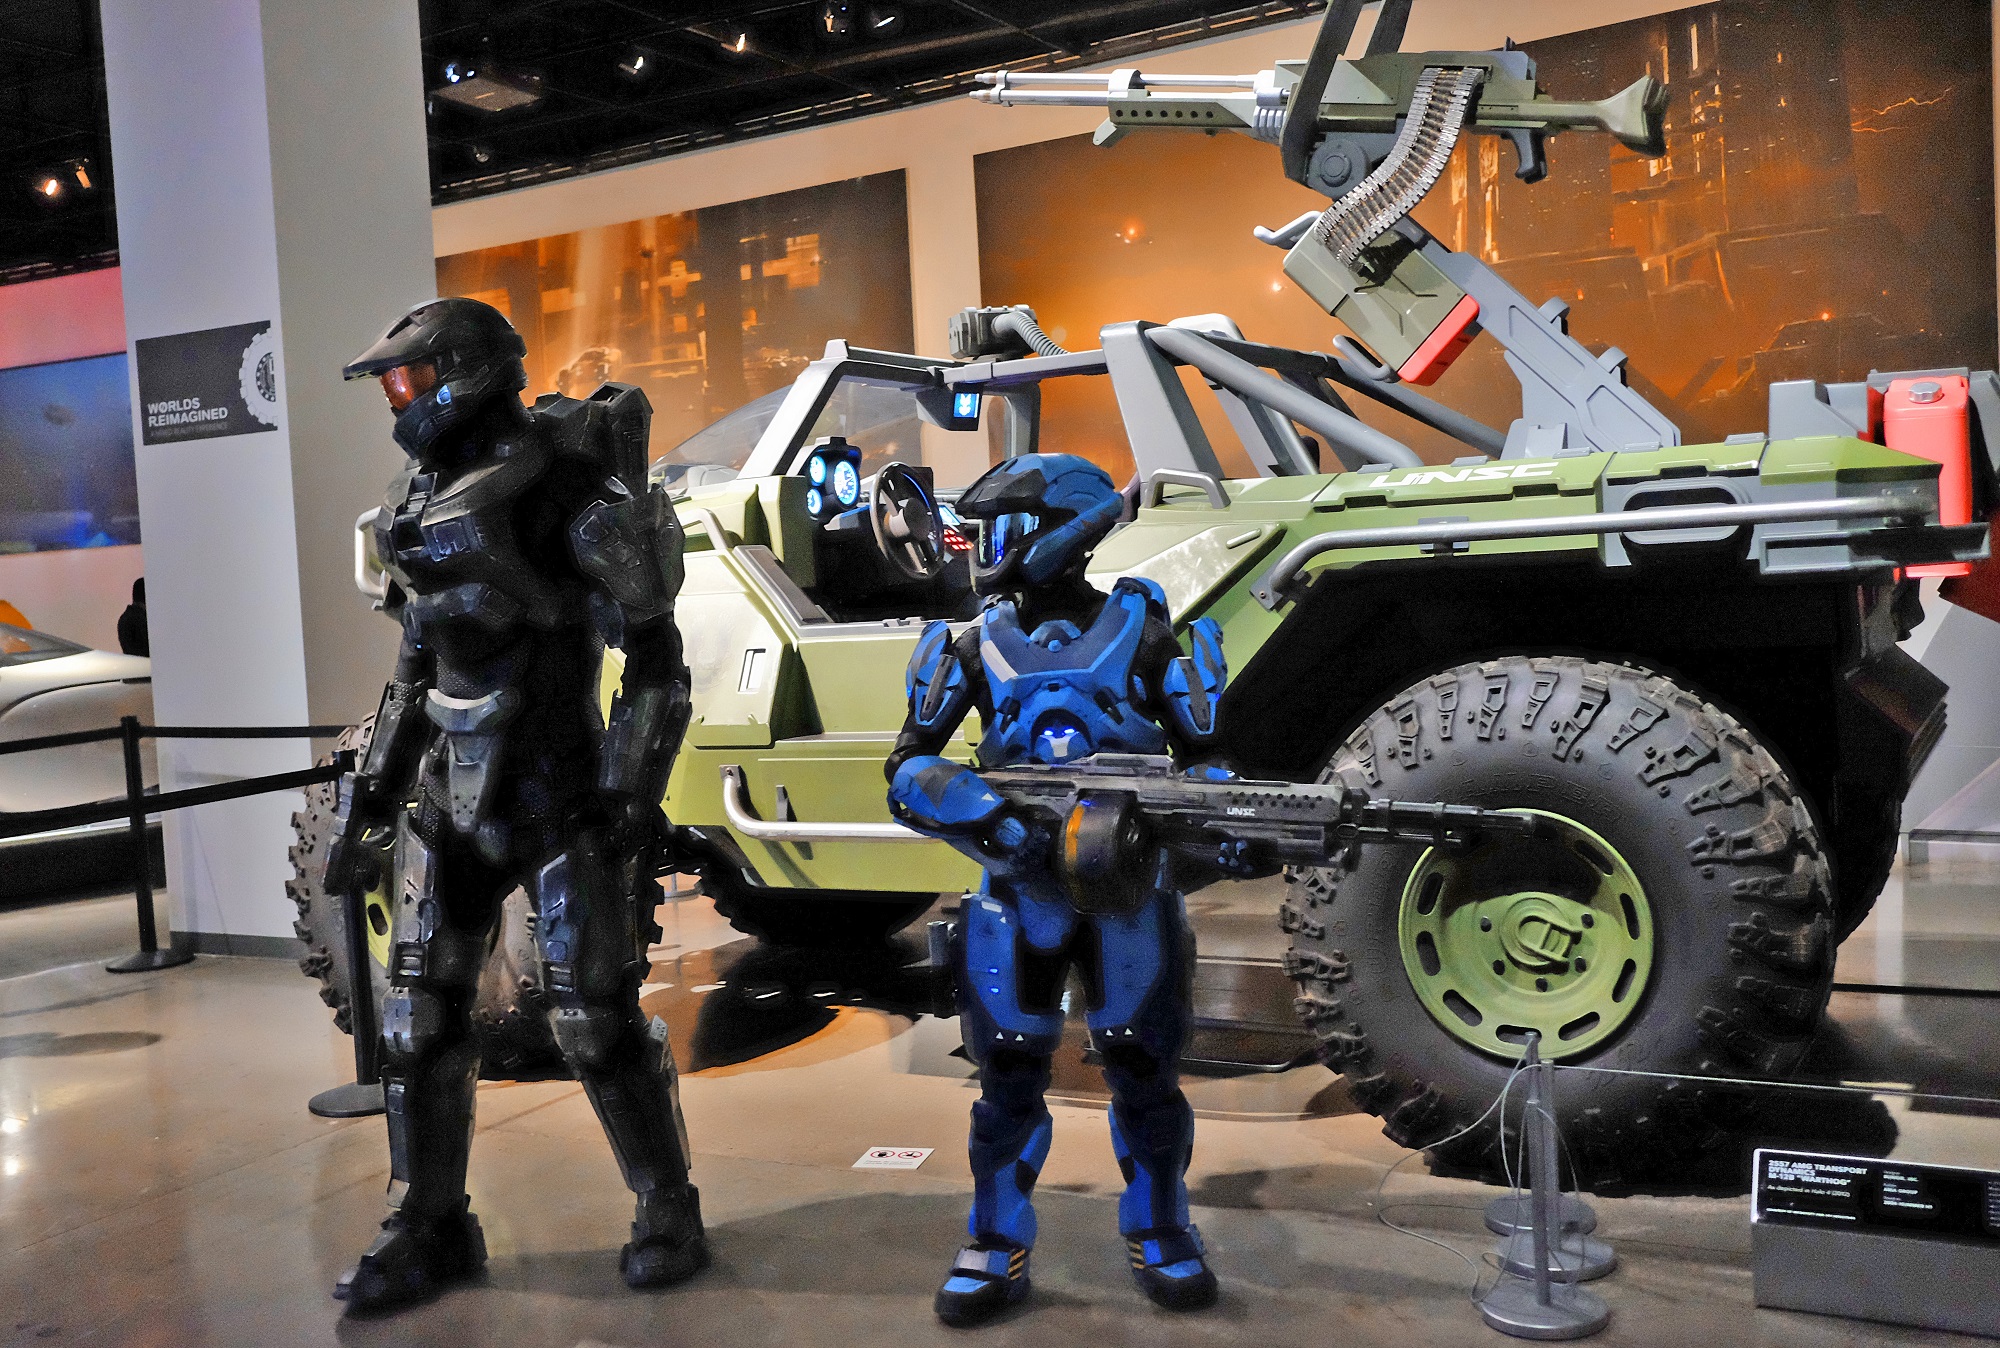 Movie Car Monday: Halo series Warthog might be a Nissan